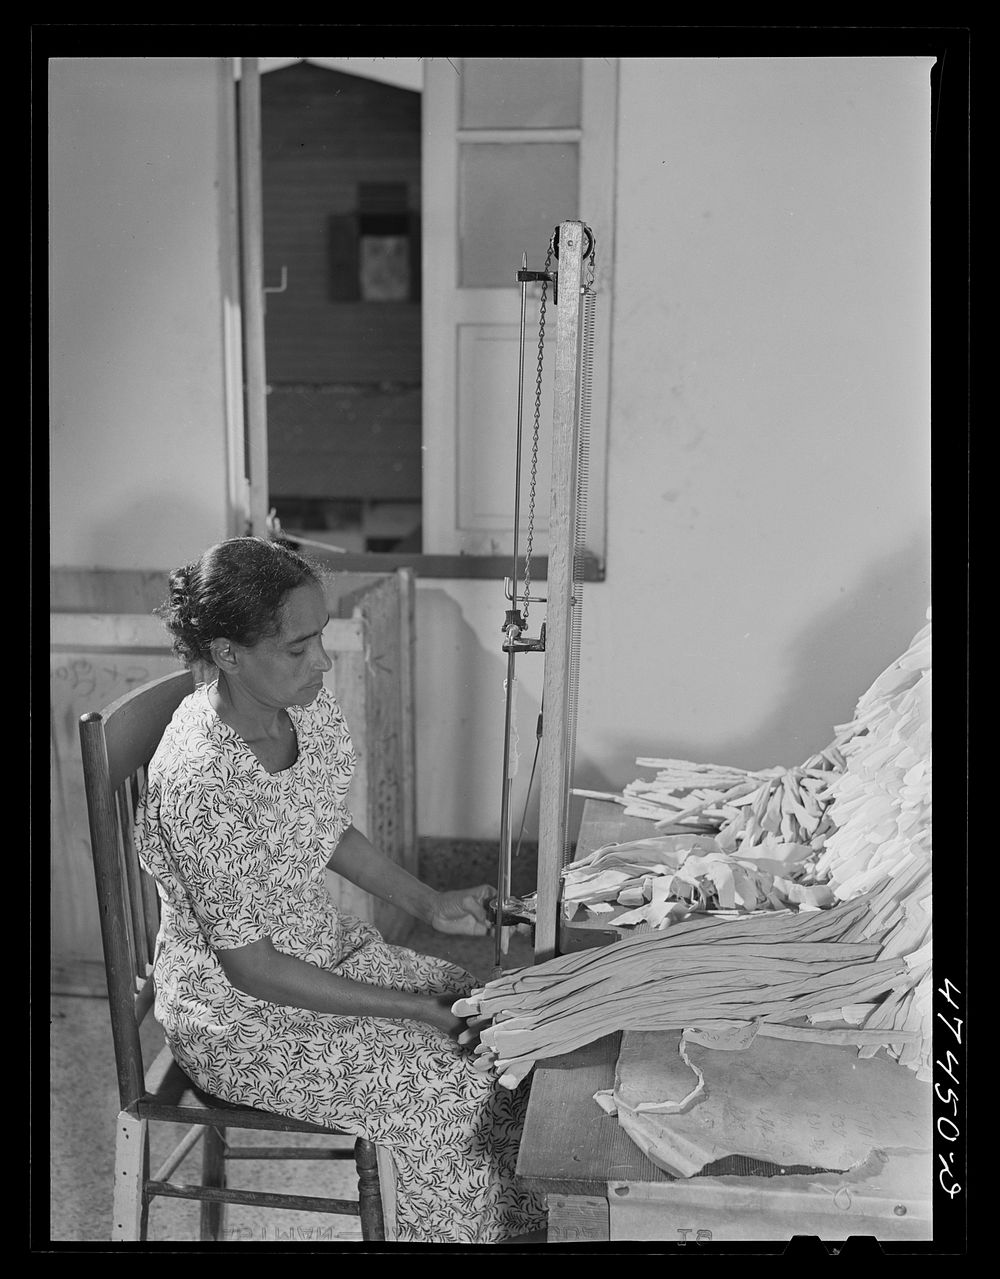 Santurce, Puerto Rico. Women working at the Rodriguez needlework factory. Sourced from the Library of Congress.